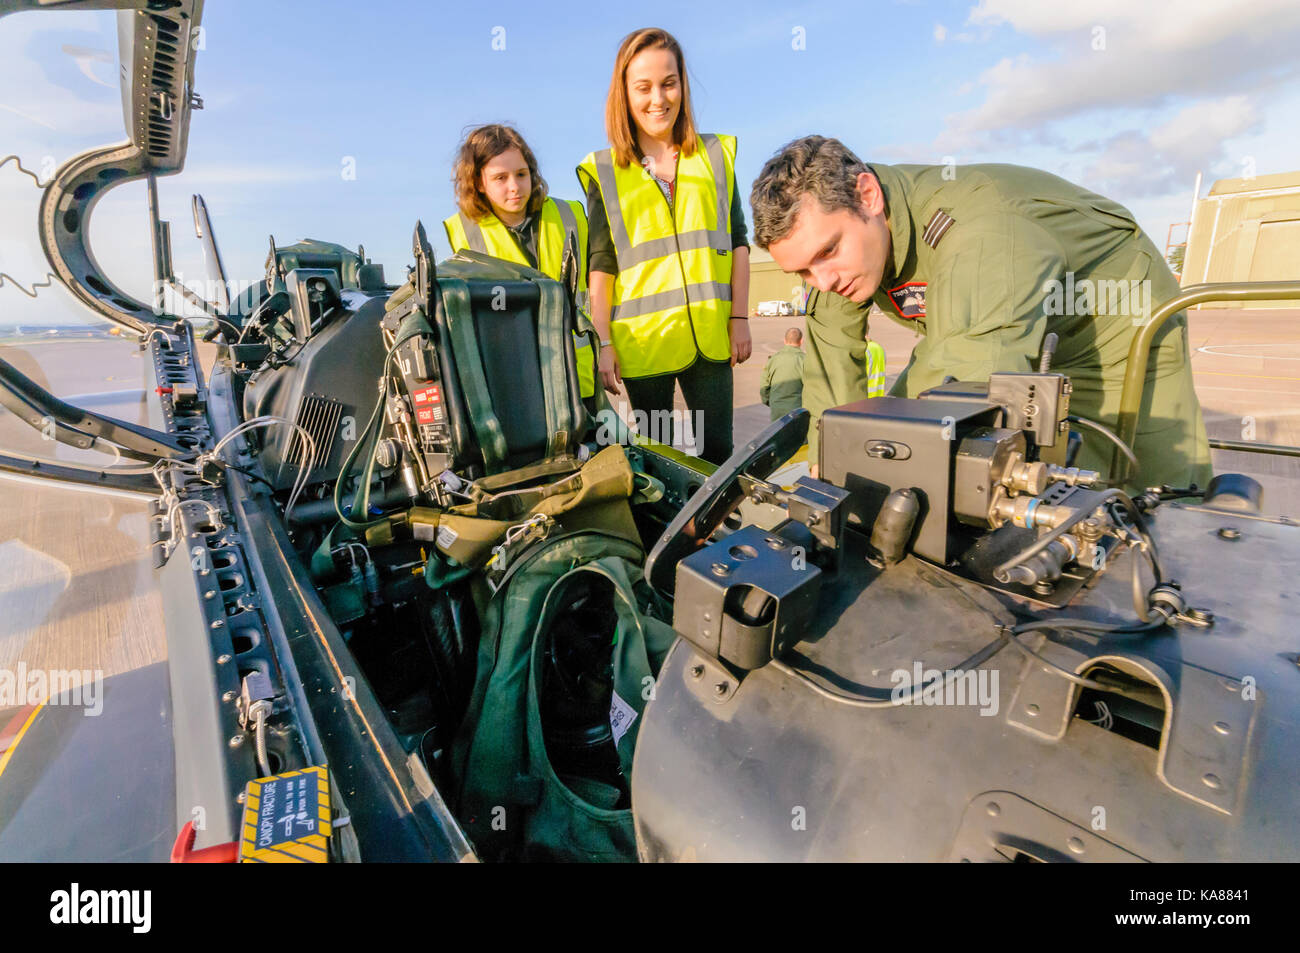 RAF Aldergrove, Northern Ireland. 25/09/2017 - A pilot shows two Air Training Corp cadets the cockpit of a Tucano training aircraft from 72 (R) Squadron. Stock Photo